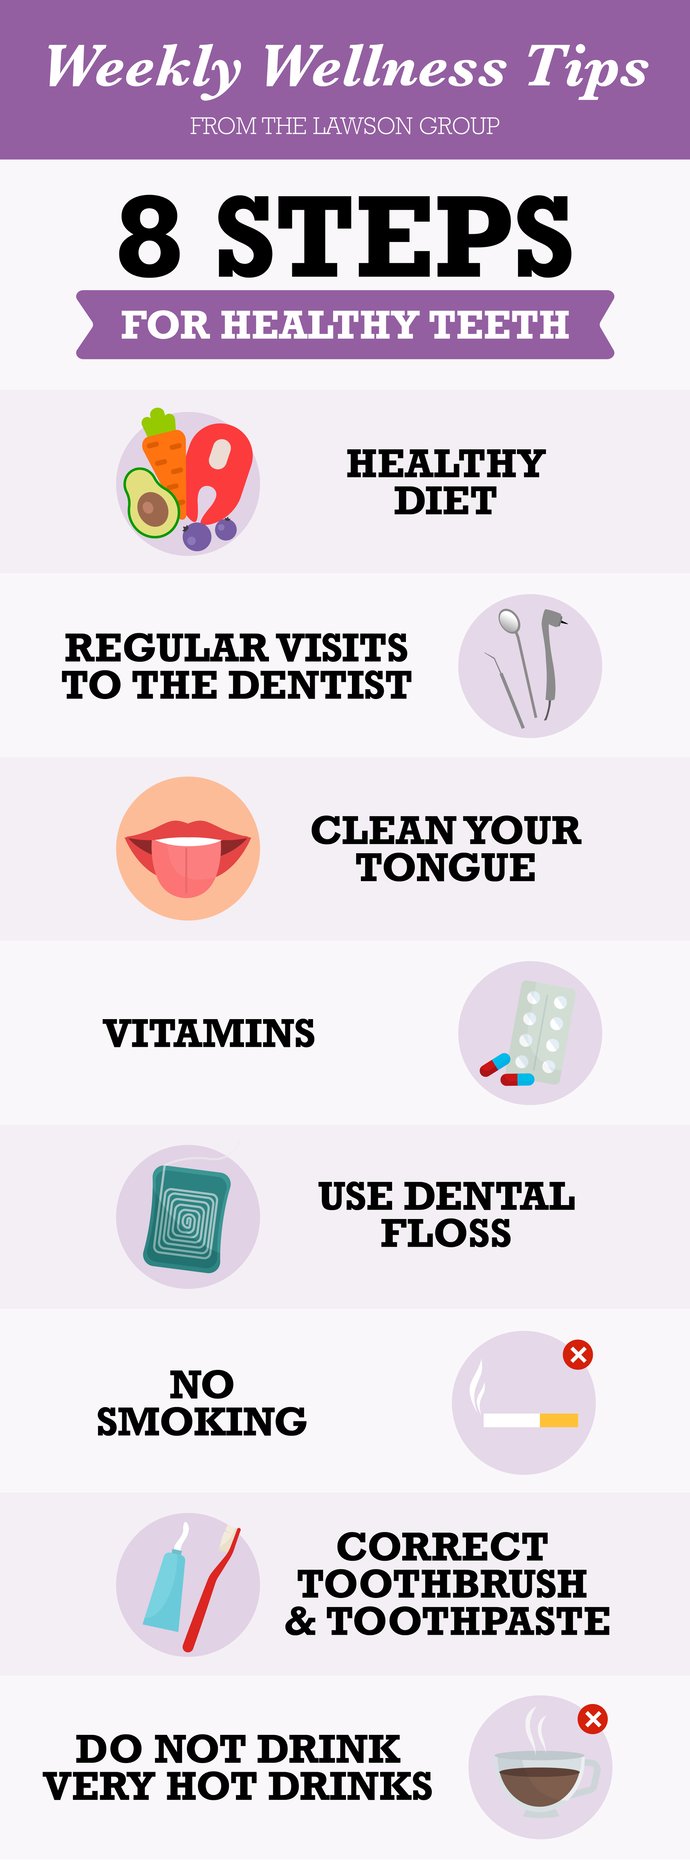 TLG22005 Wellness Tips Keep Your Teeth Healthy and Clean Infographic-1080px-01